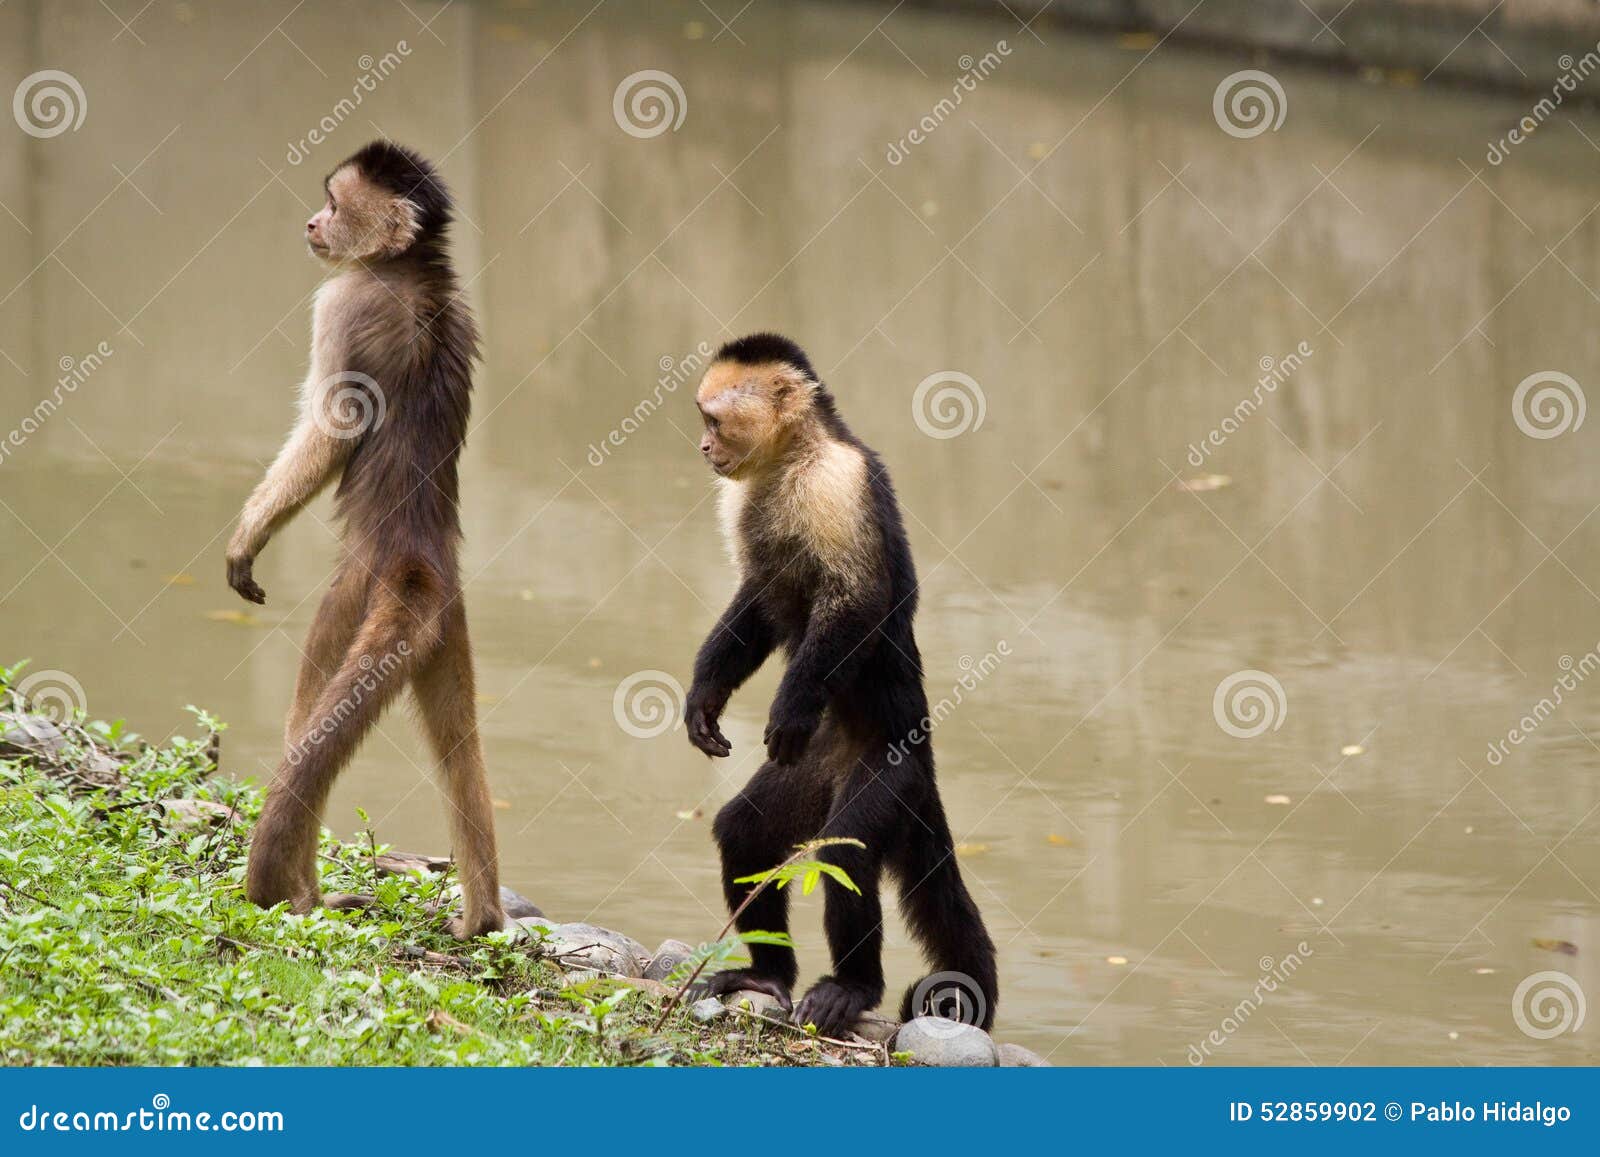 monkeys in parque historico, cultural and